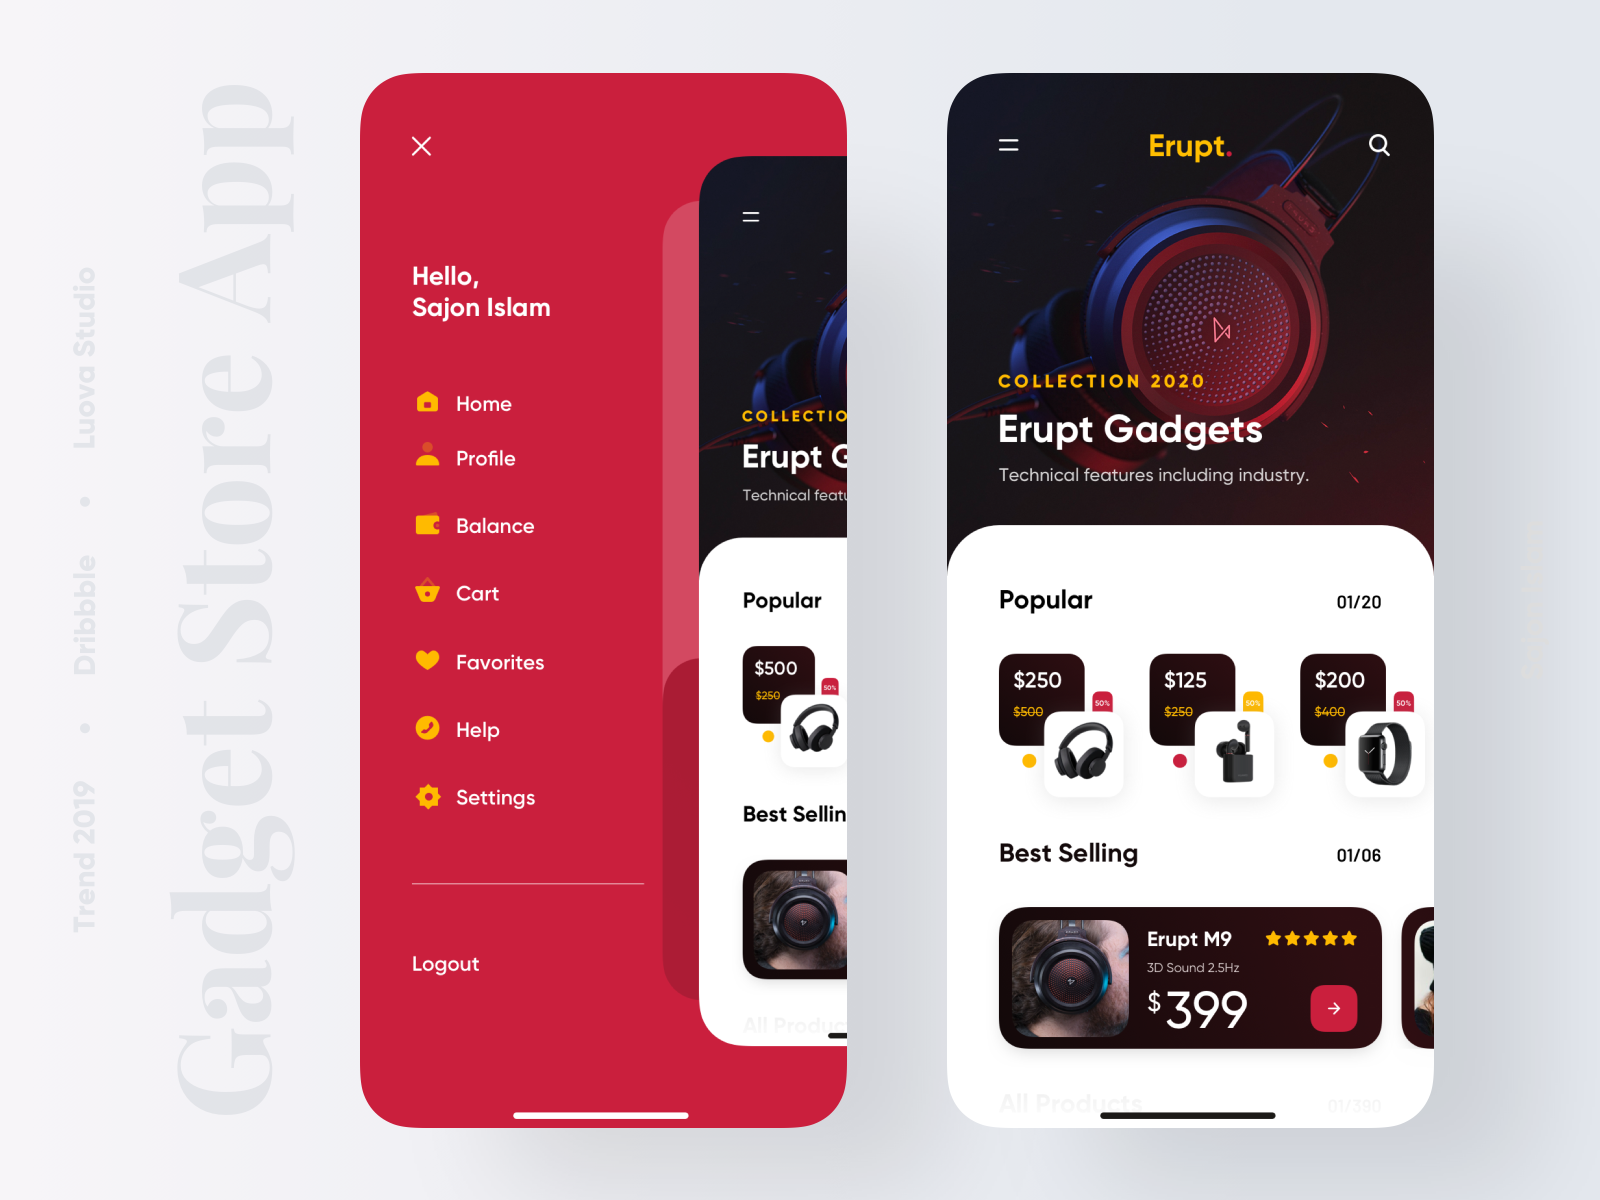 Gadget Store App by Sajon for Ofspace Team on Dribbble